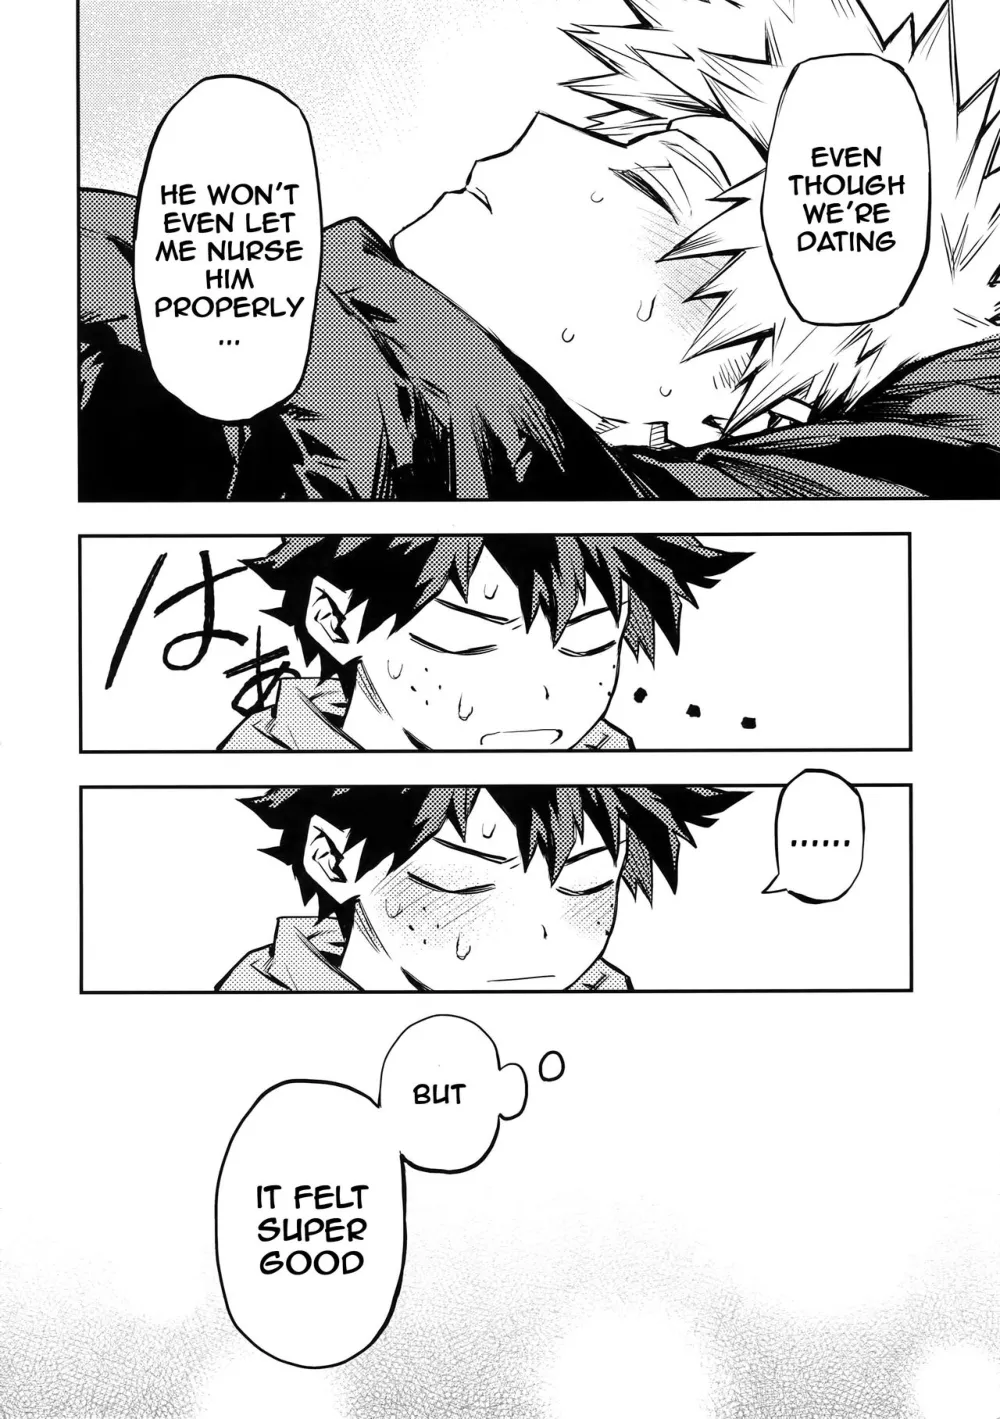 The Battle Between Sick Kacchan and Me - Page 21